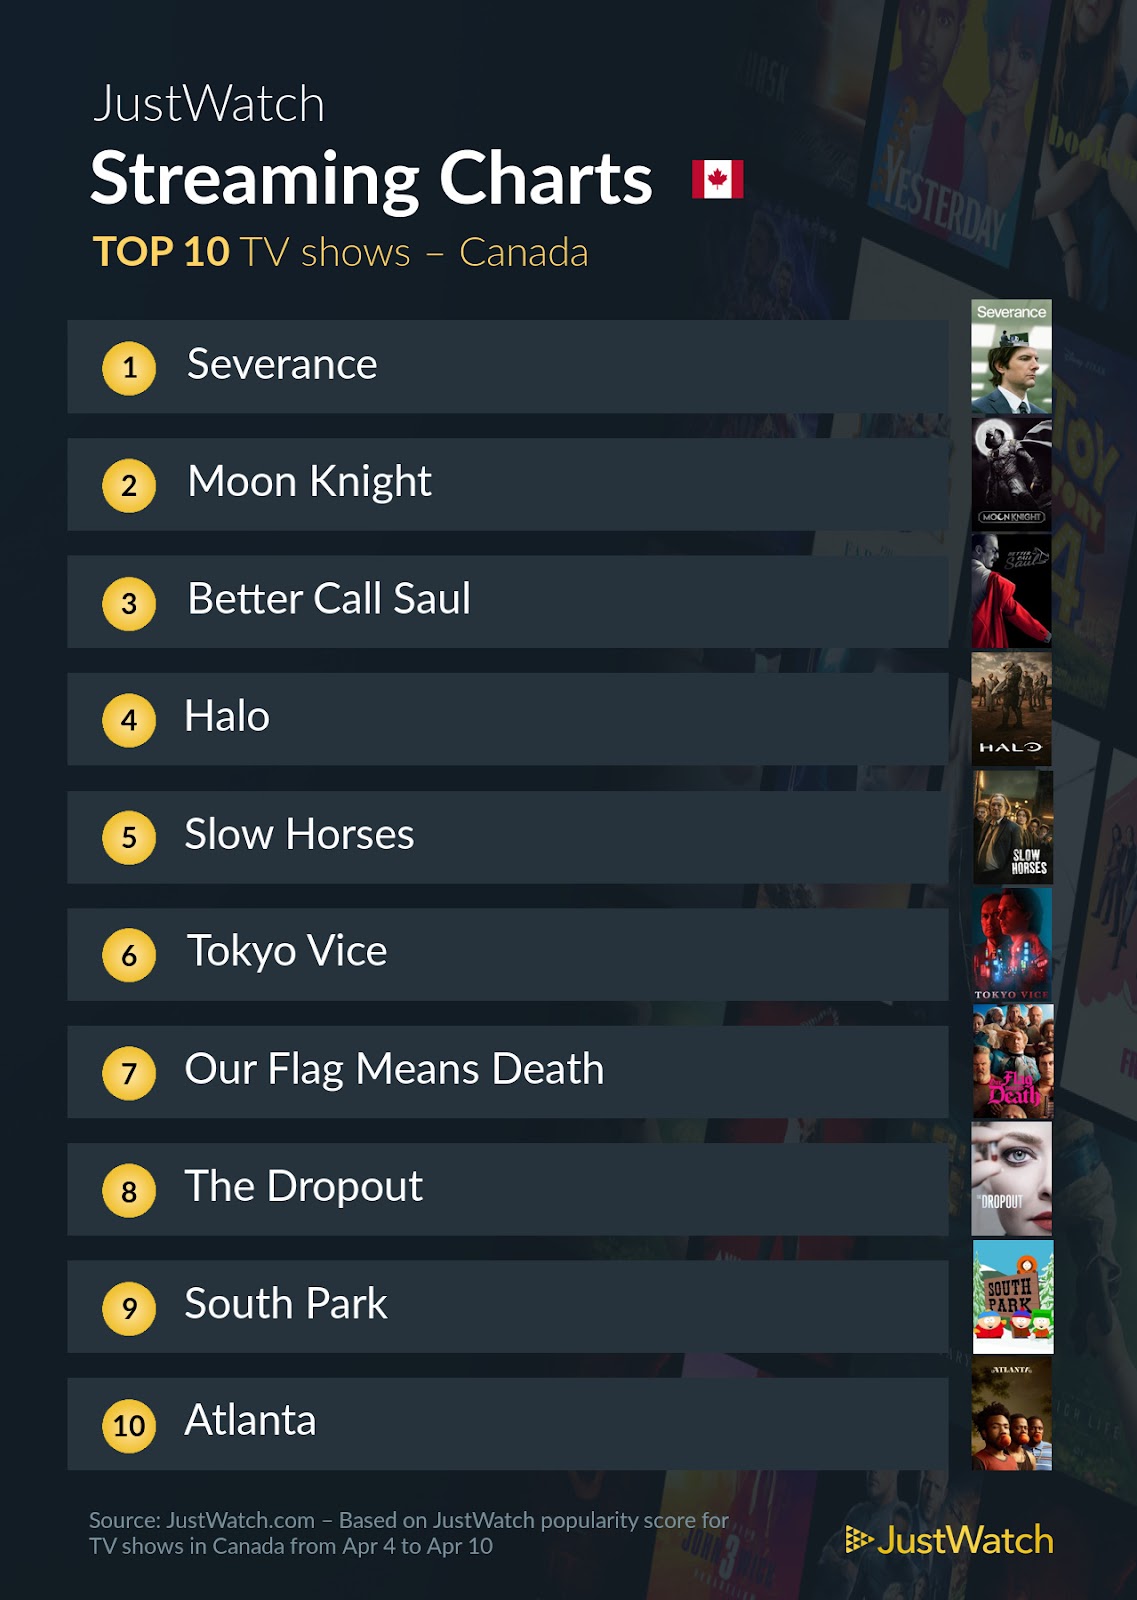 better call saul canada top streaming charts most popular movies TV shows right now